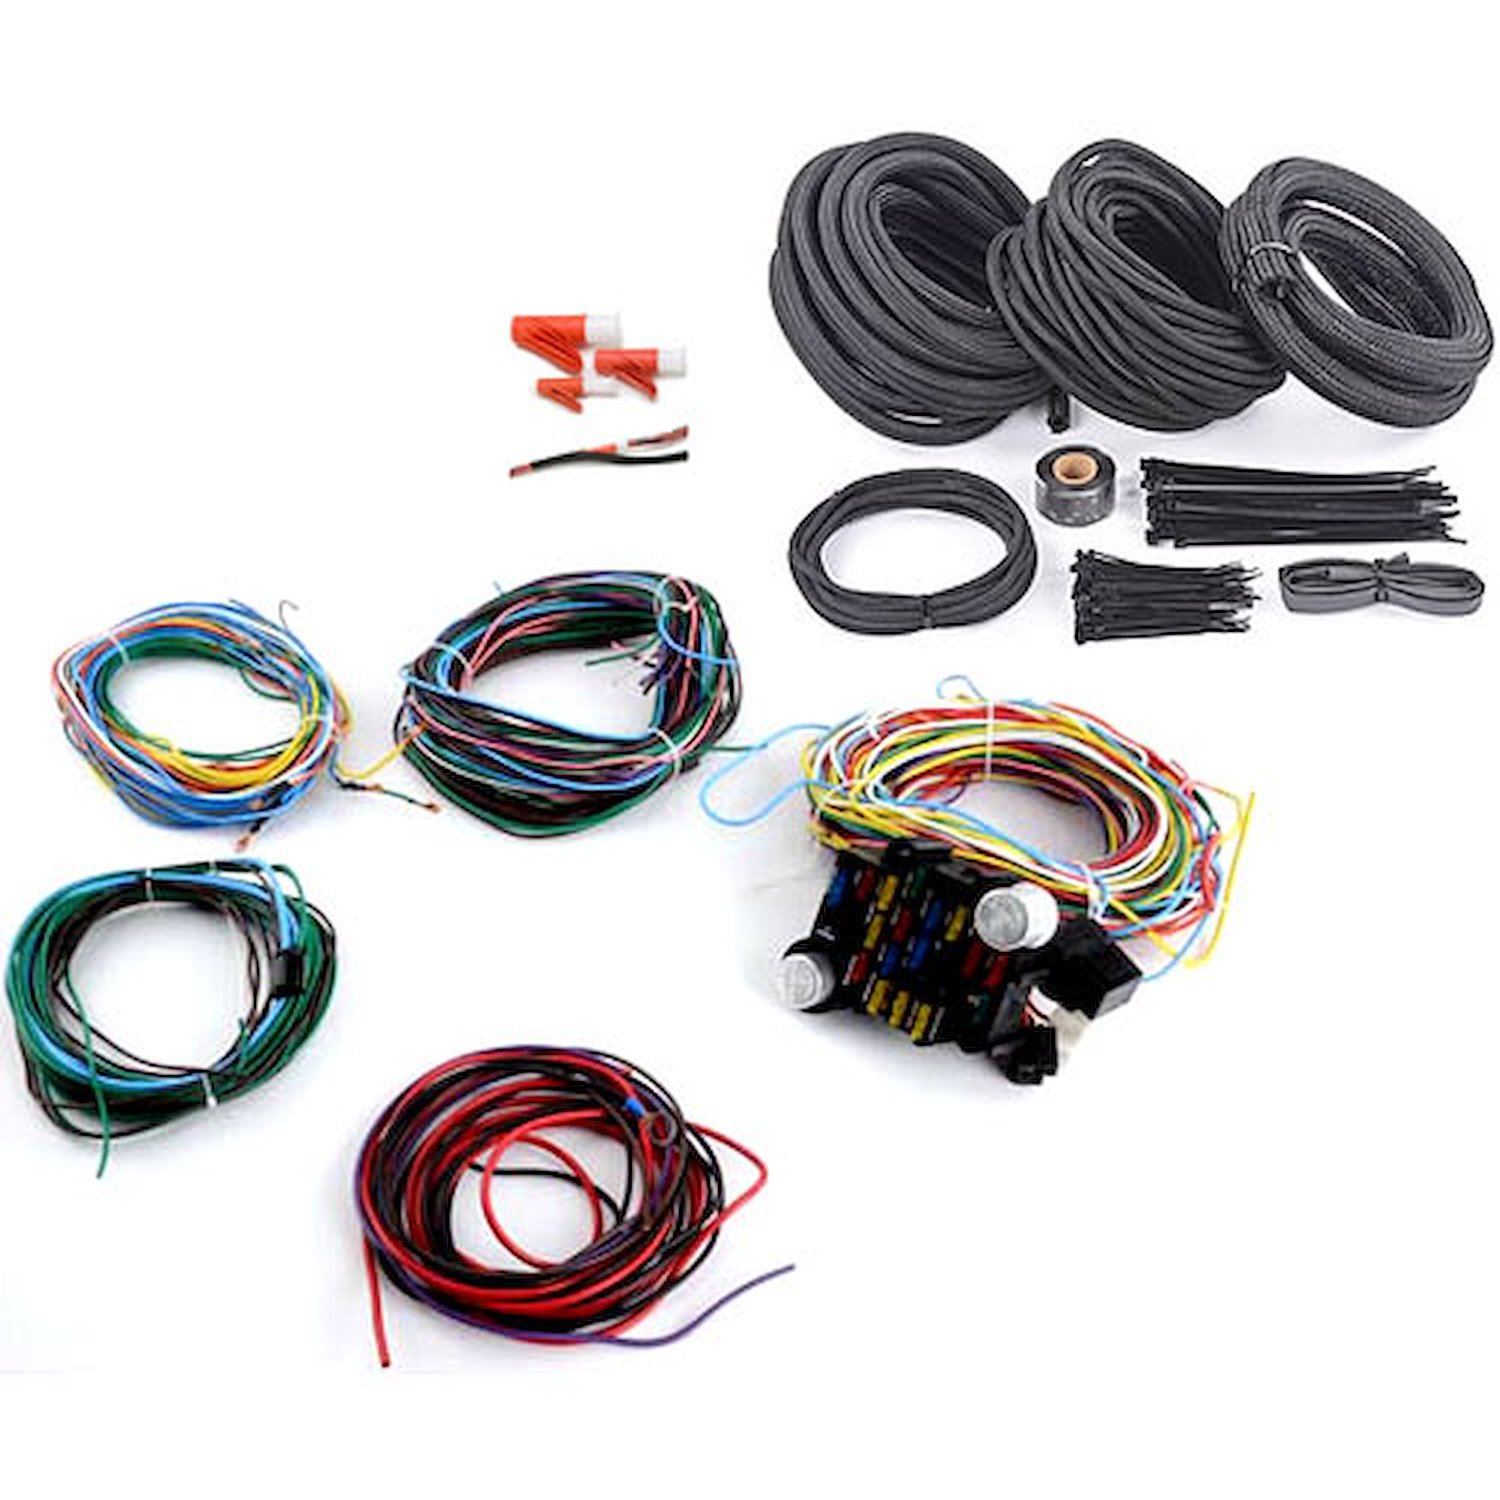 22-Circuit Wiring Harness Kit Includes: Speedmaster 22-Circuit Wiring Harness Kit